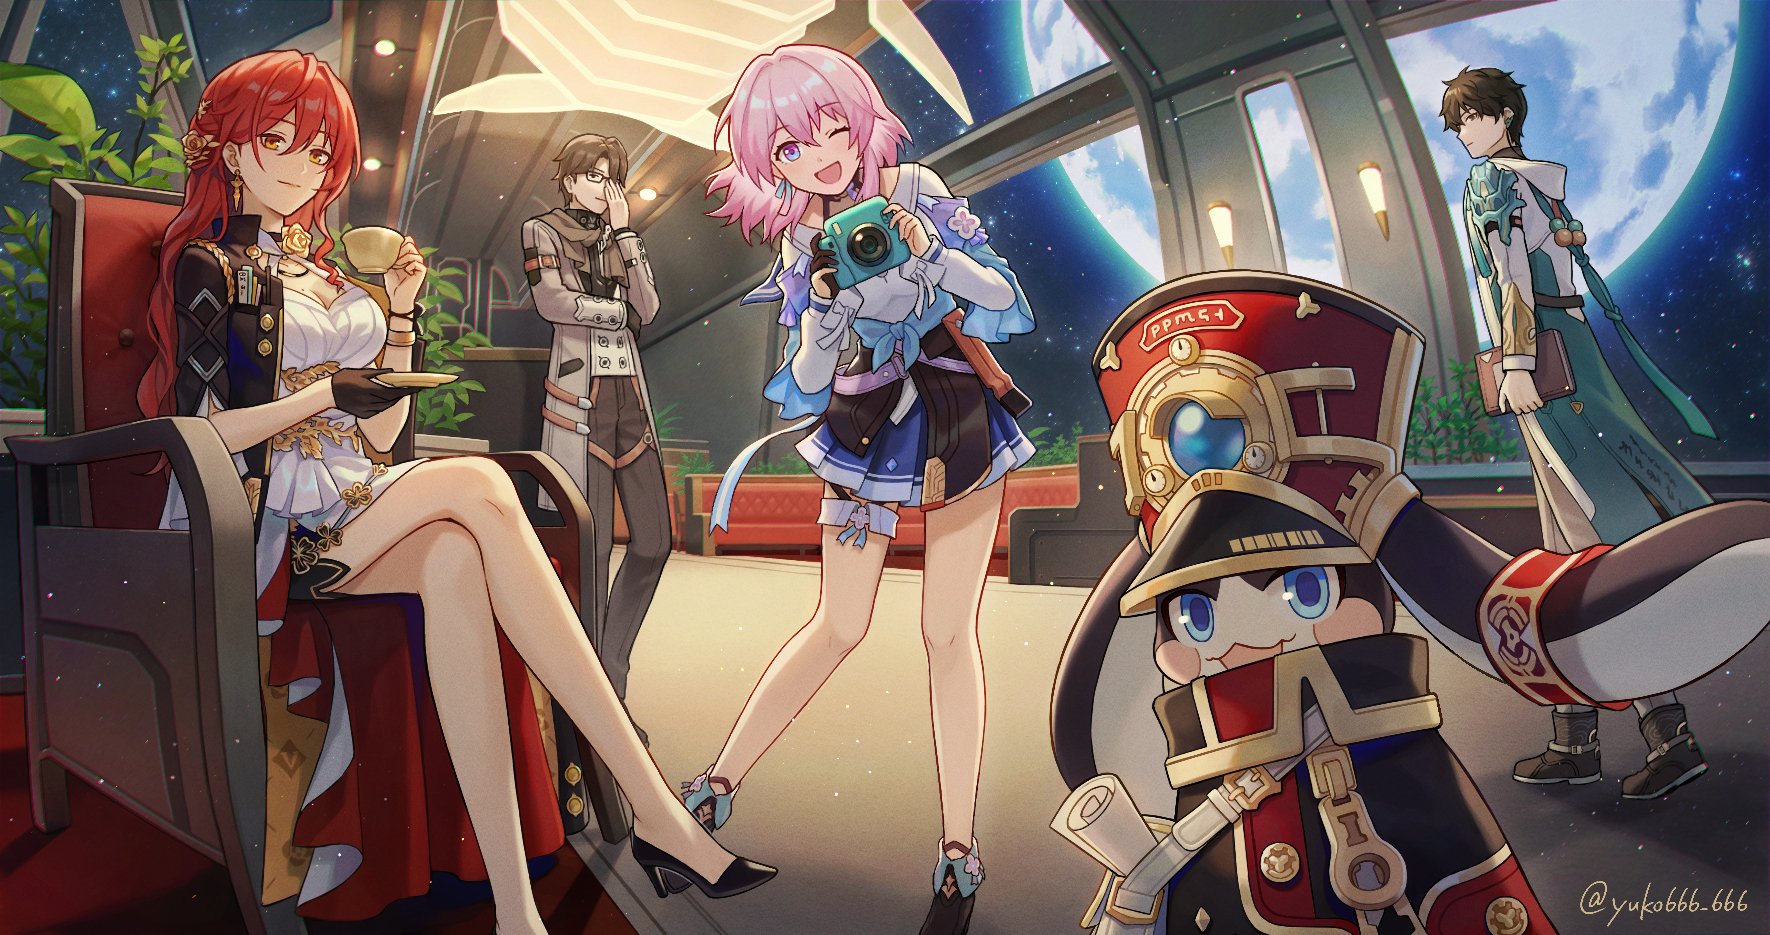 Honkai: Star Rail to Get Creative! Star Rail Universe No.1 Winners Announcement Hi, Trailblazers! The current phase of fan creations winners has been announced! Let's take a look